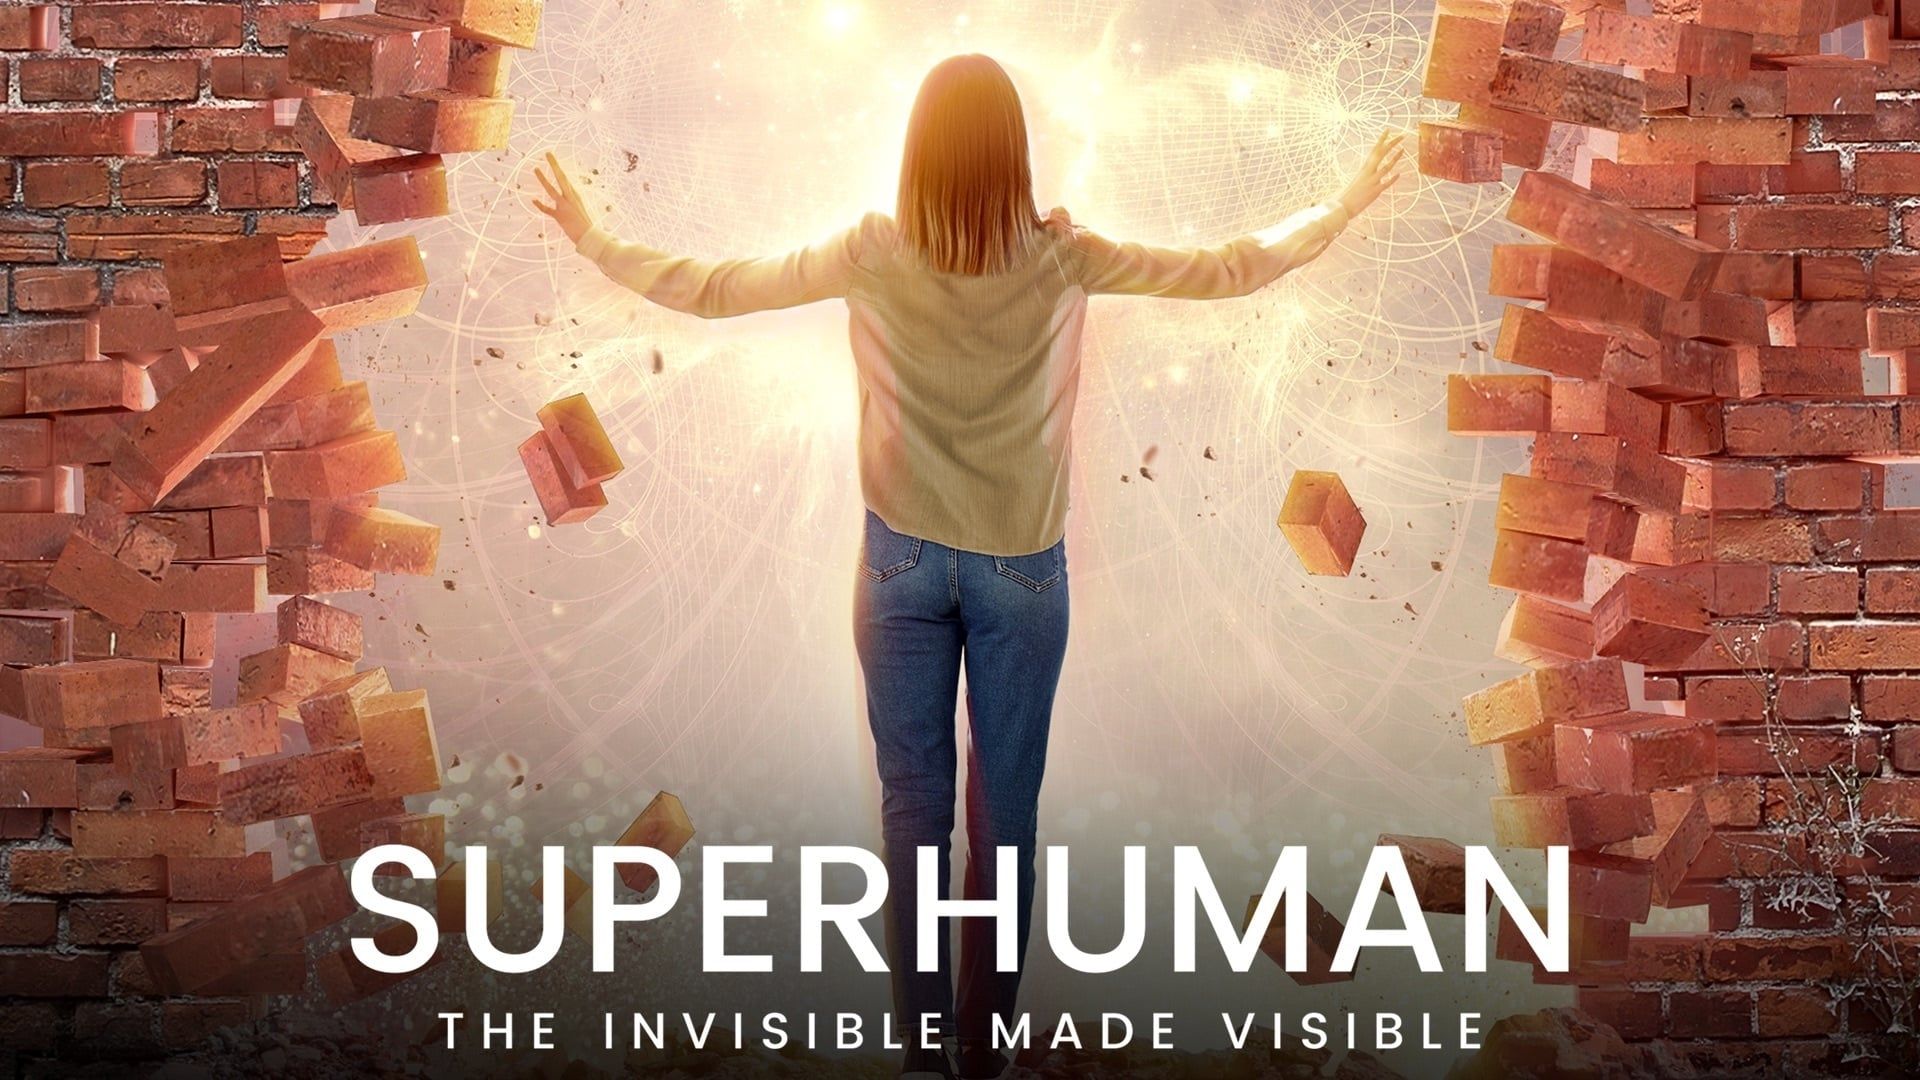 Superhuman: The Invisible Made Visible background